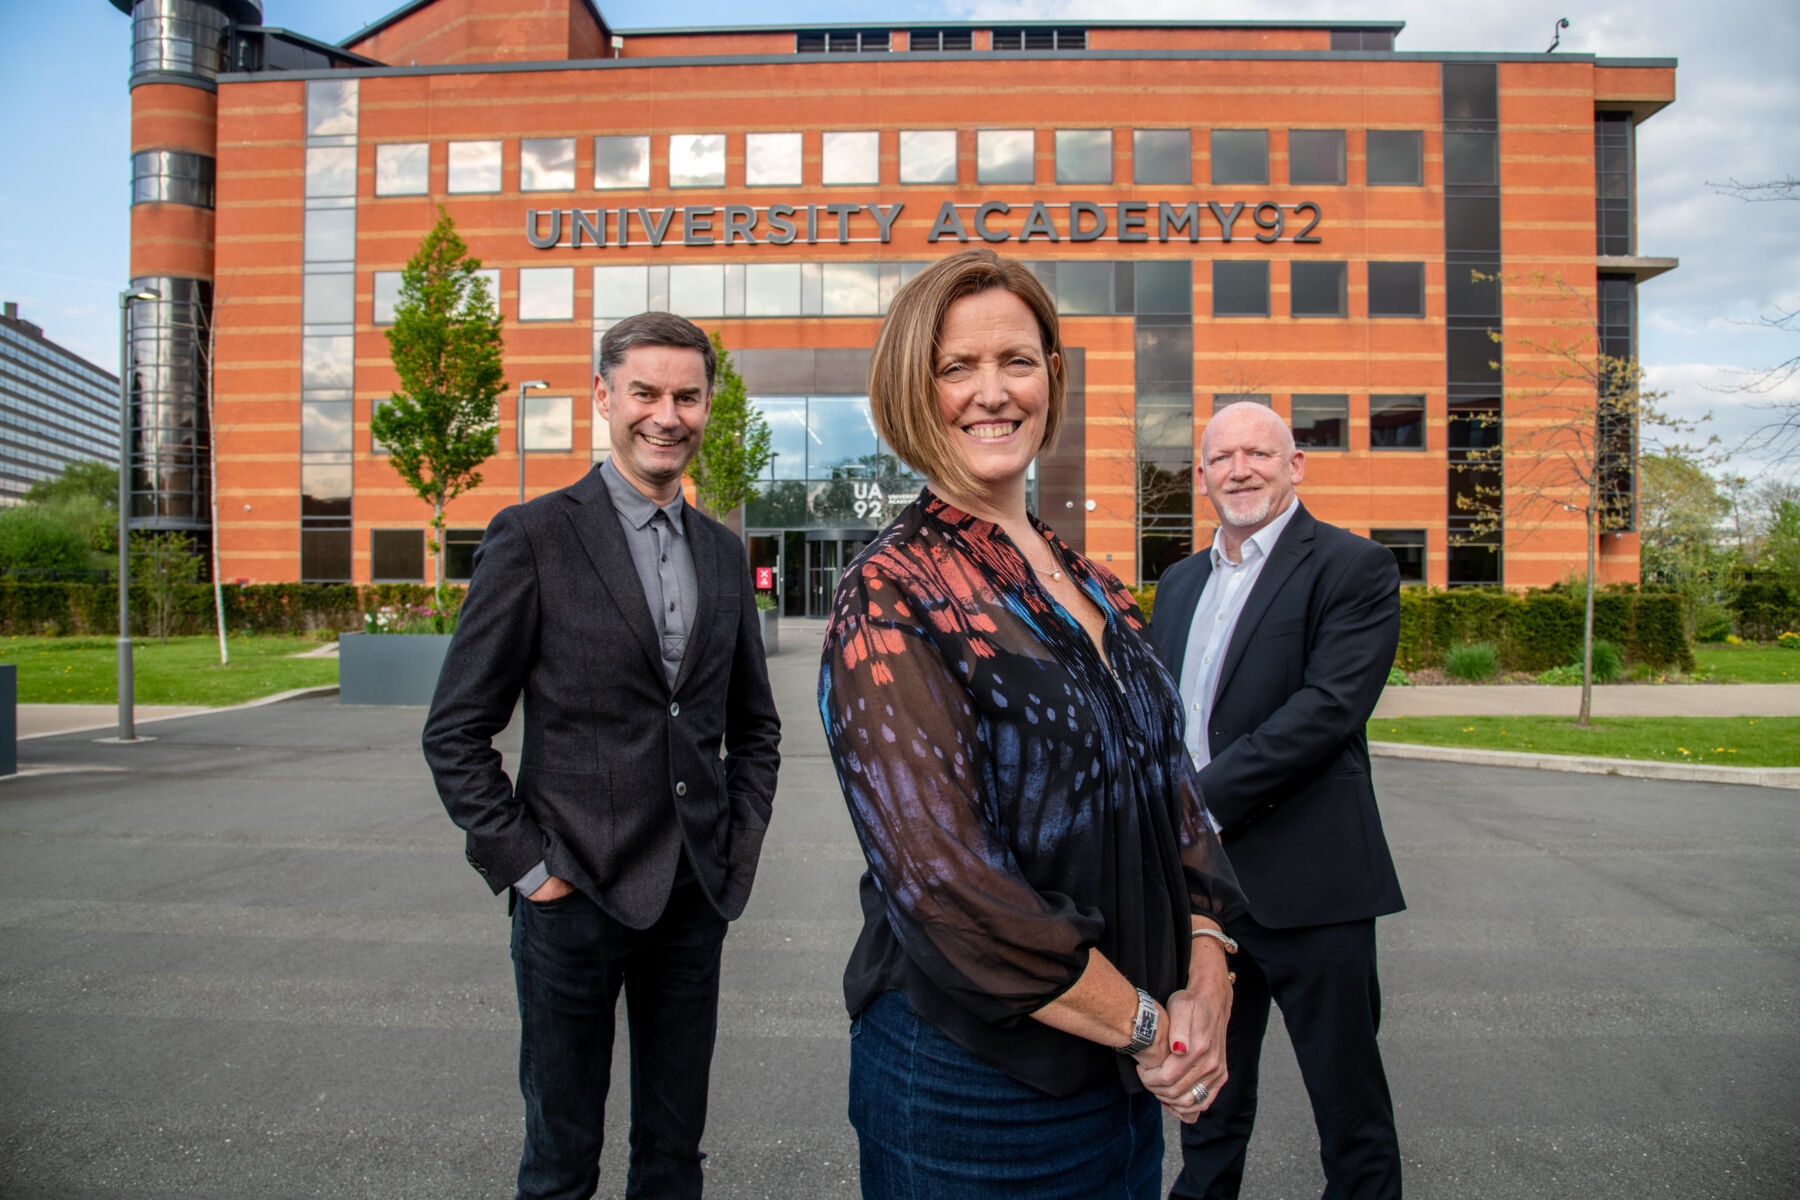 (L-R) Rod Waldie, CEO of Gateley, Sara Prowse, CEO of UA92 and Paul Jefferson, Head of Gateley’s Manchester office, outside UA92.